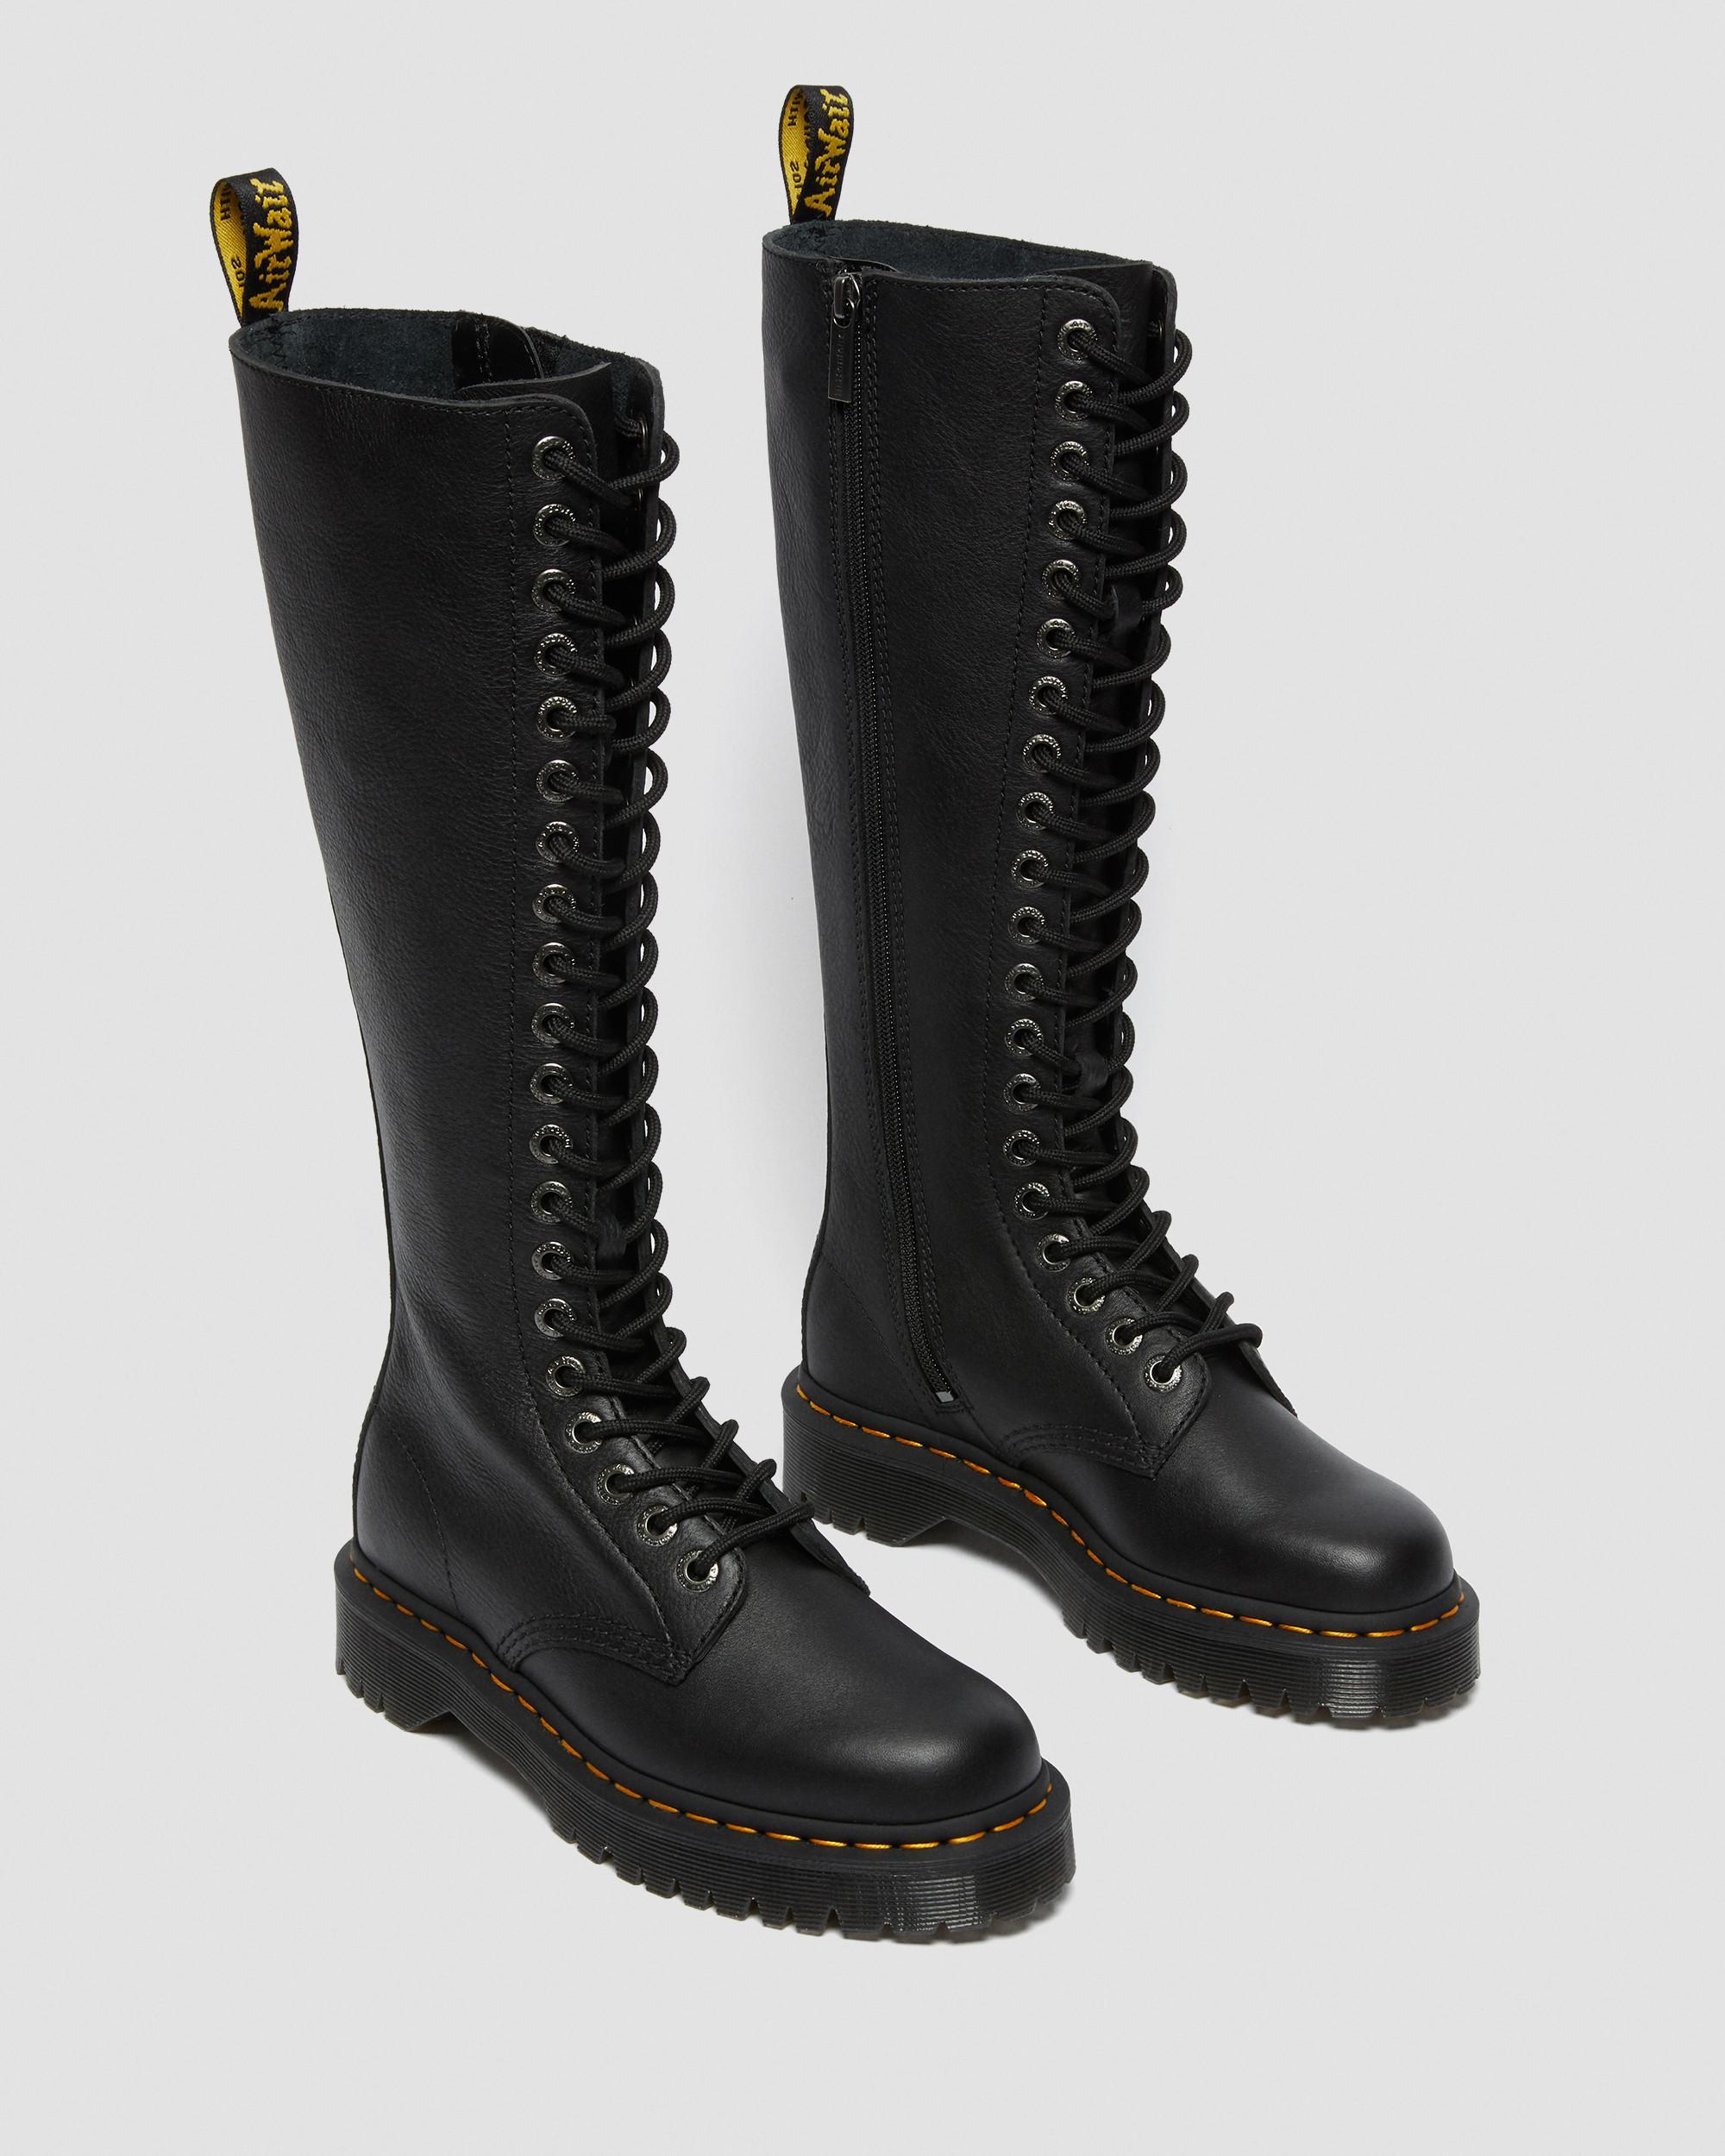 Dr. Martens 1b60 Bex Pisa Leather Knee High Boots in Black - Lyst